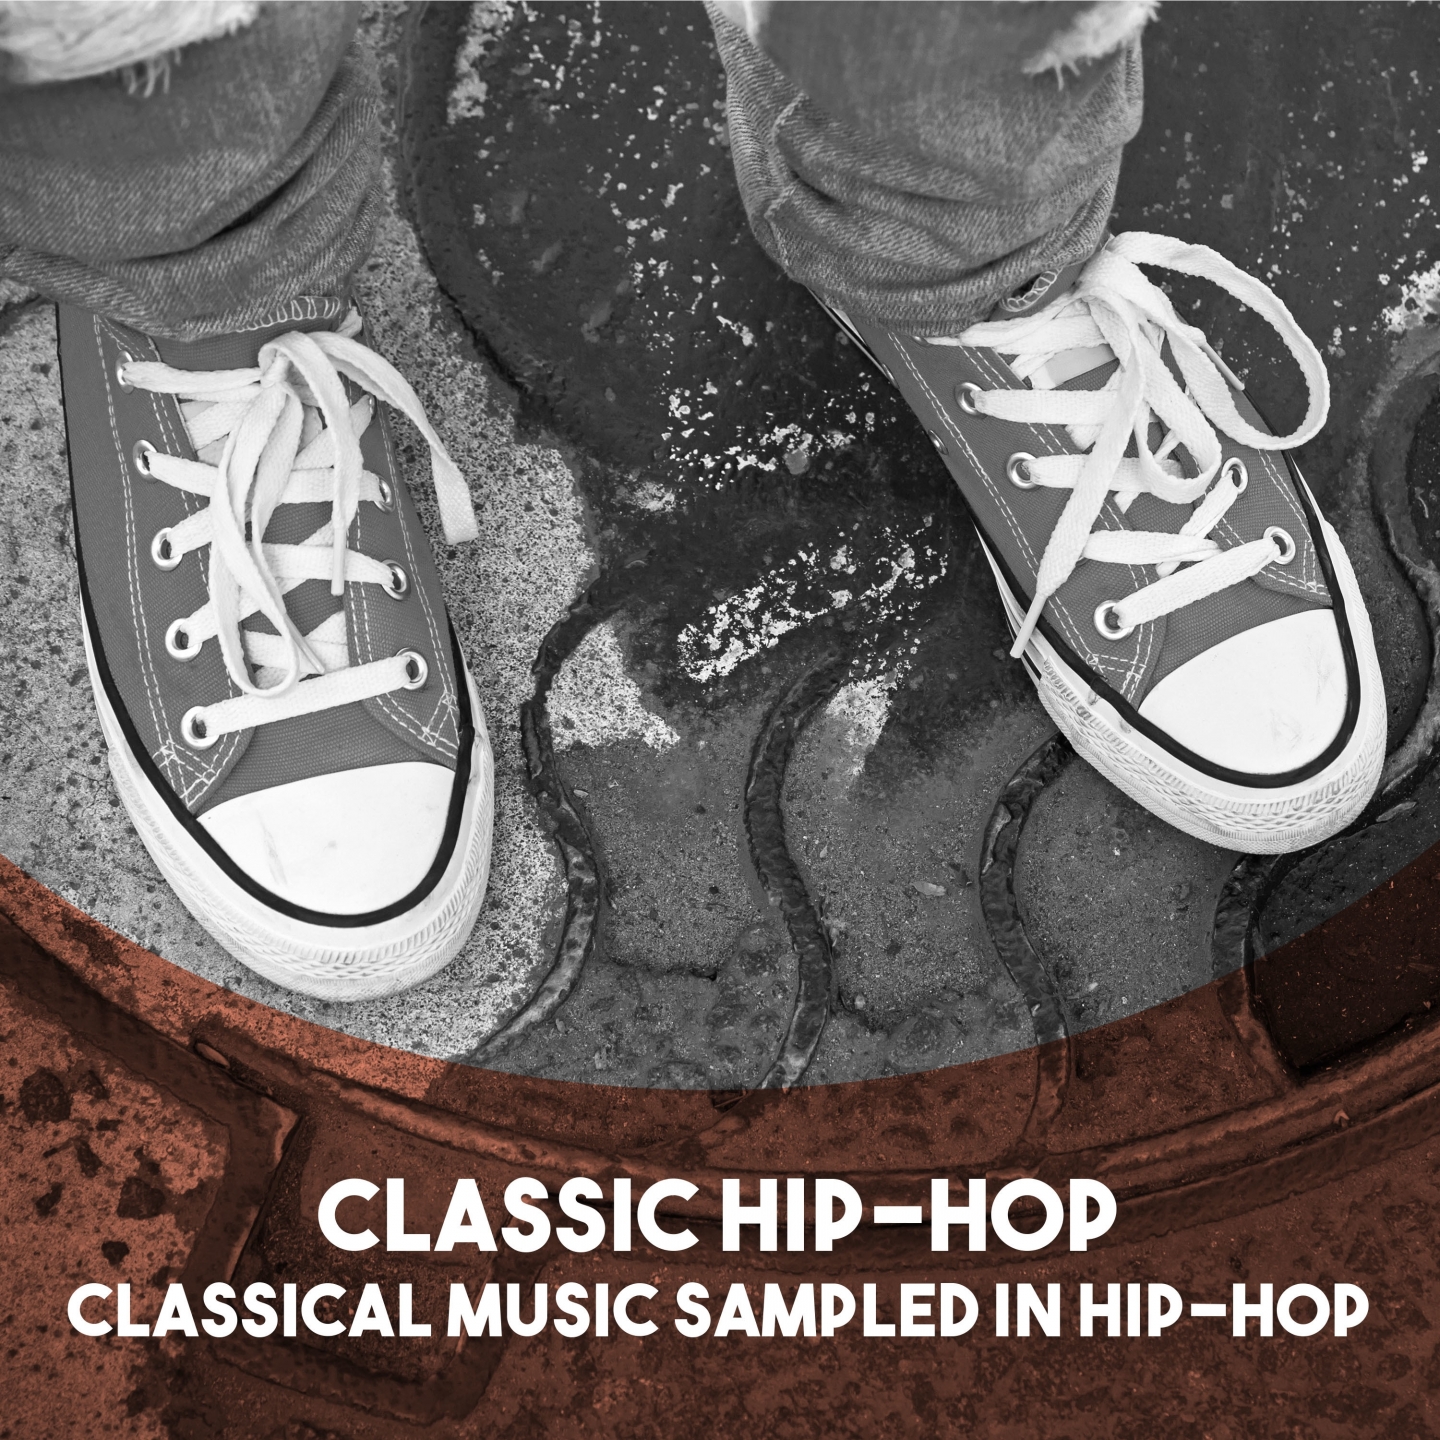 Classic Hip-Hop: Classical Music Sampled in Hip-Hop